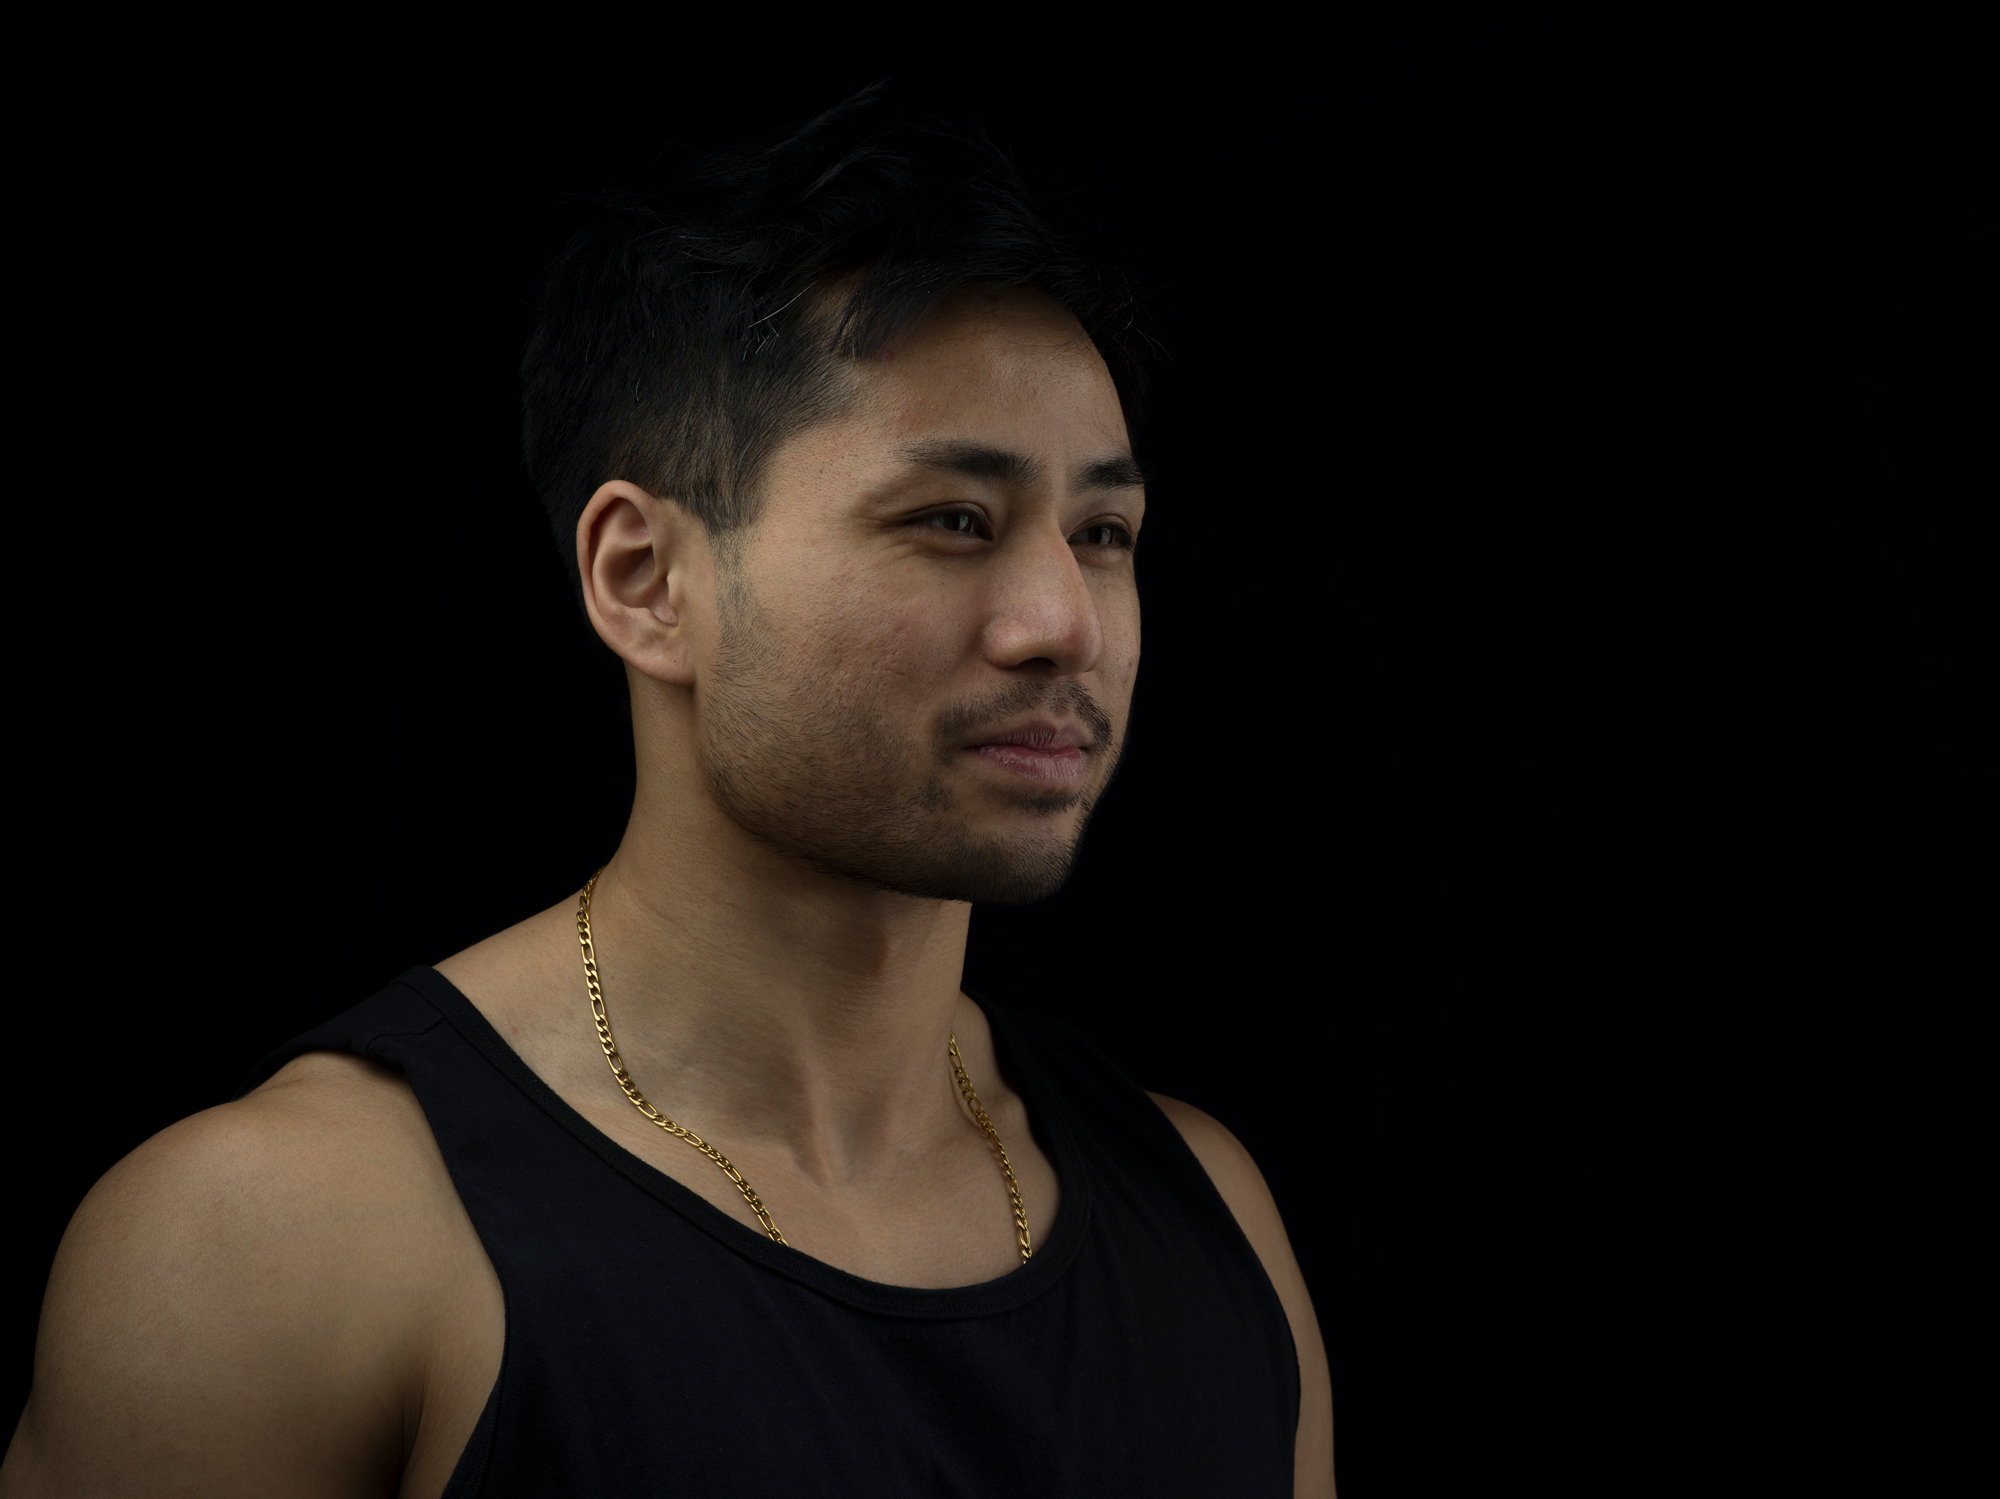 Photograph of a person wearing a black tank top on a black background